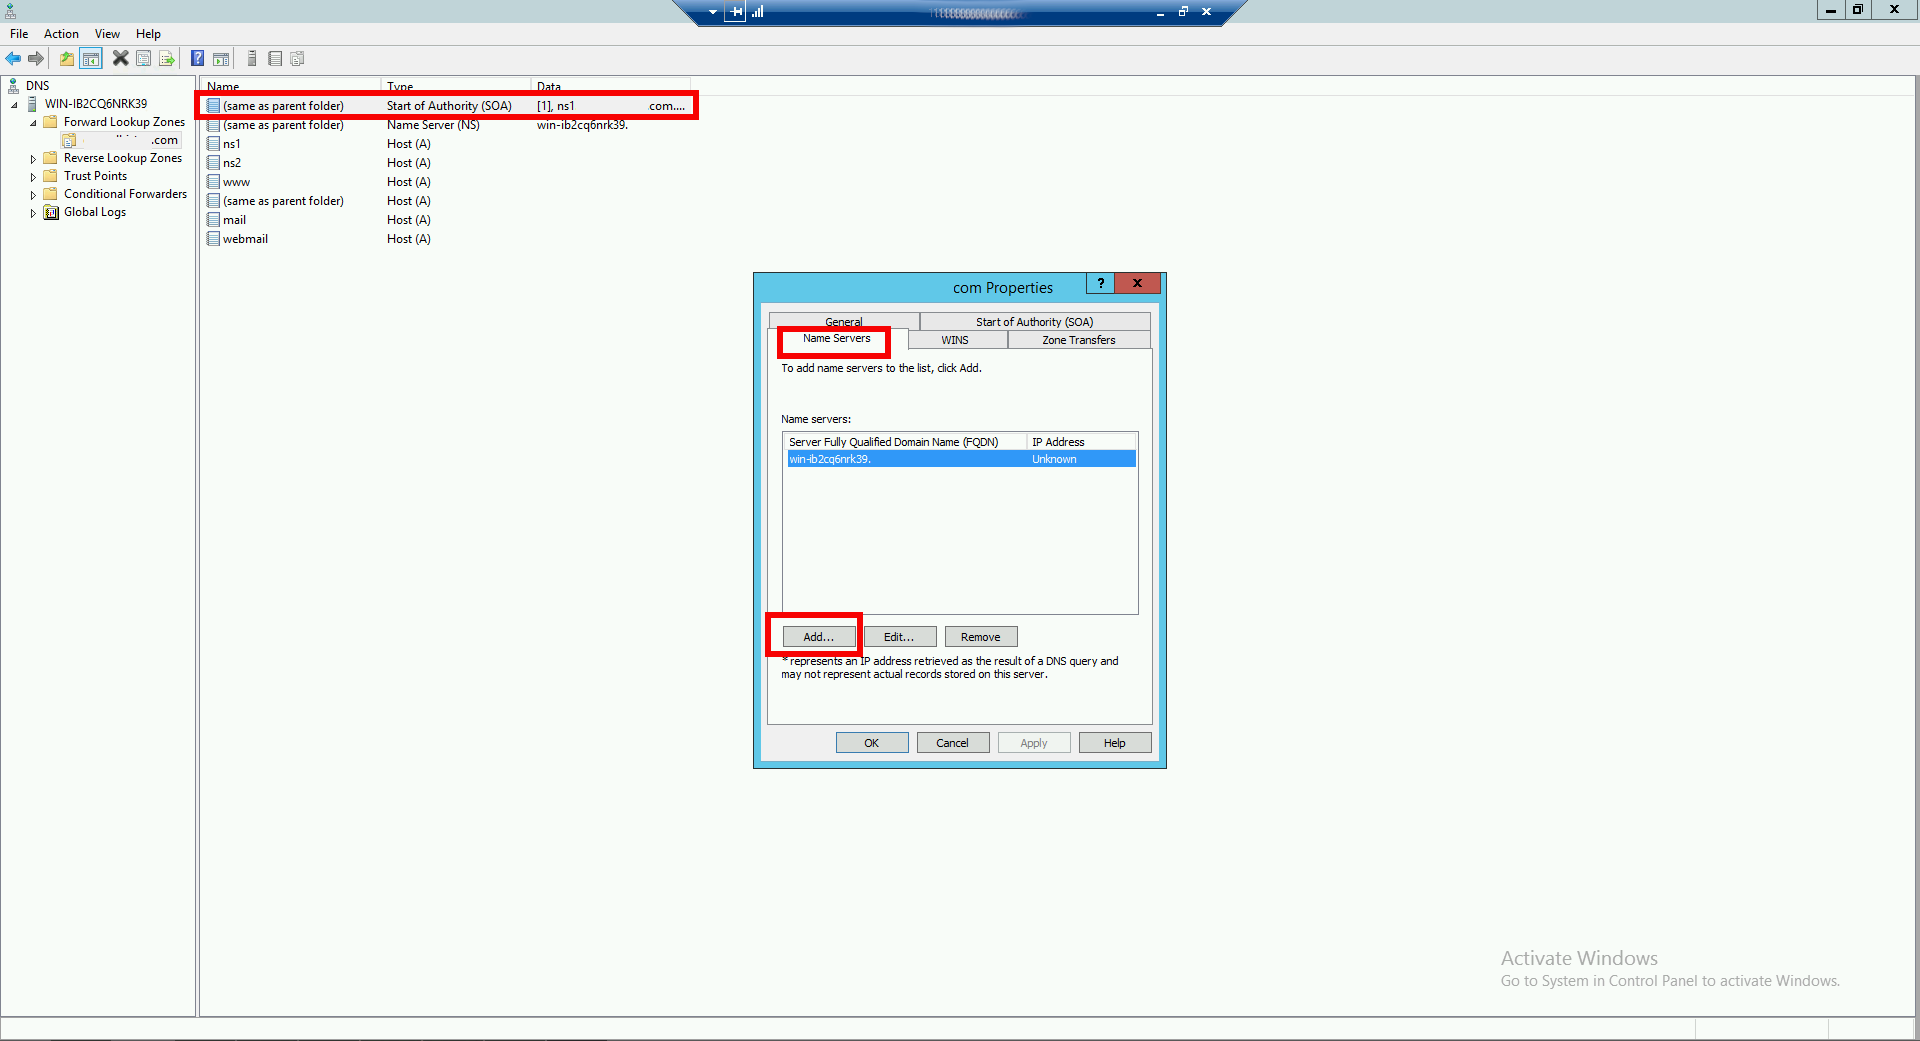 create-soa-2-record-dns-manager-windows-server-2012.png